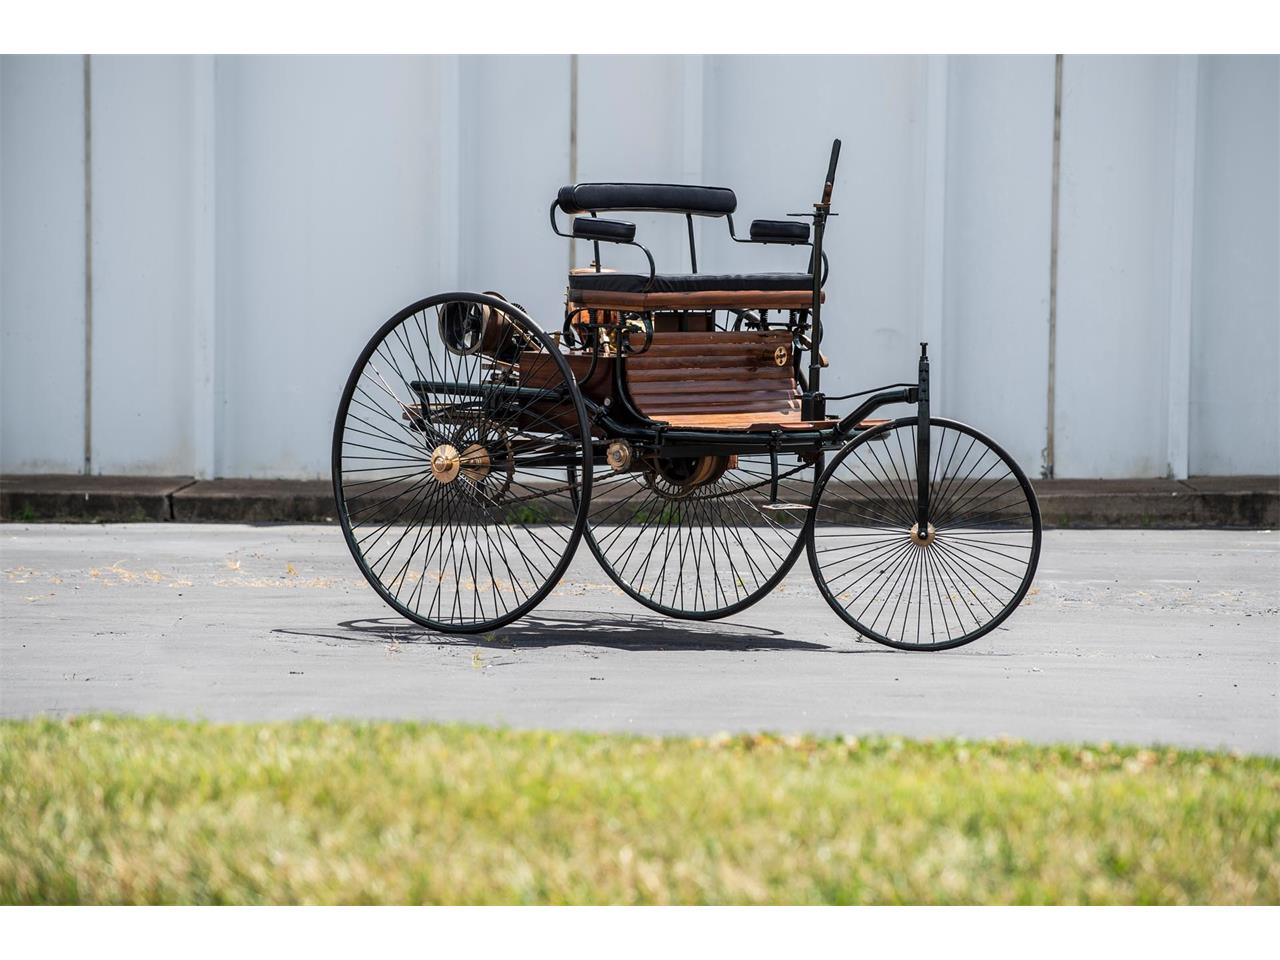 For Sale at Auction: 1886 Benz Patent-Motorwagen for sale in Auburn, IN